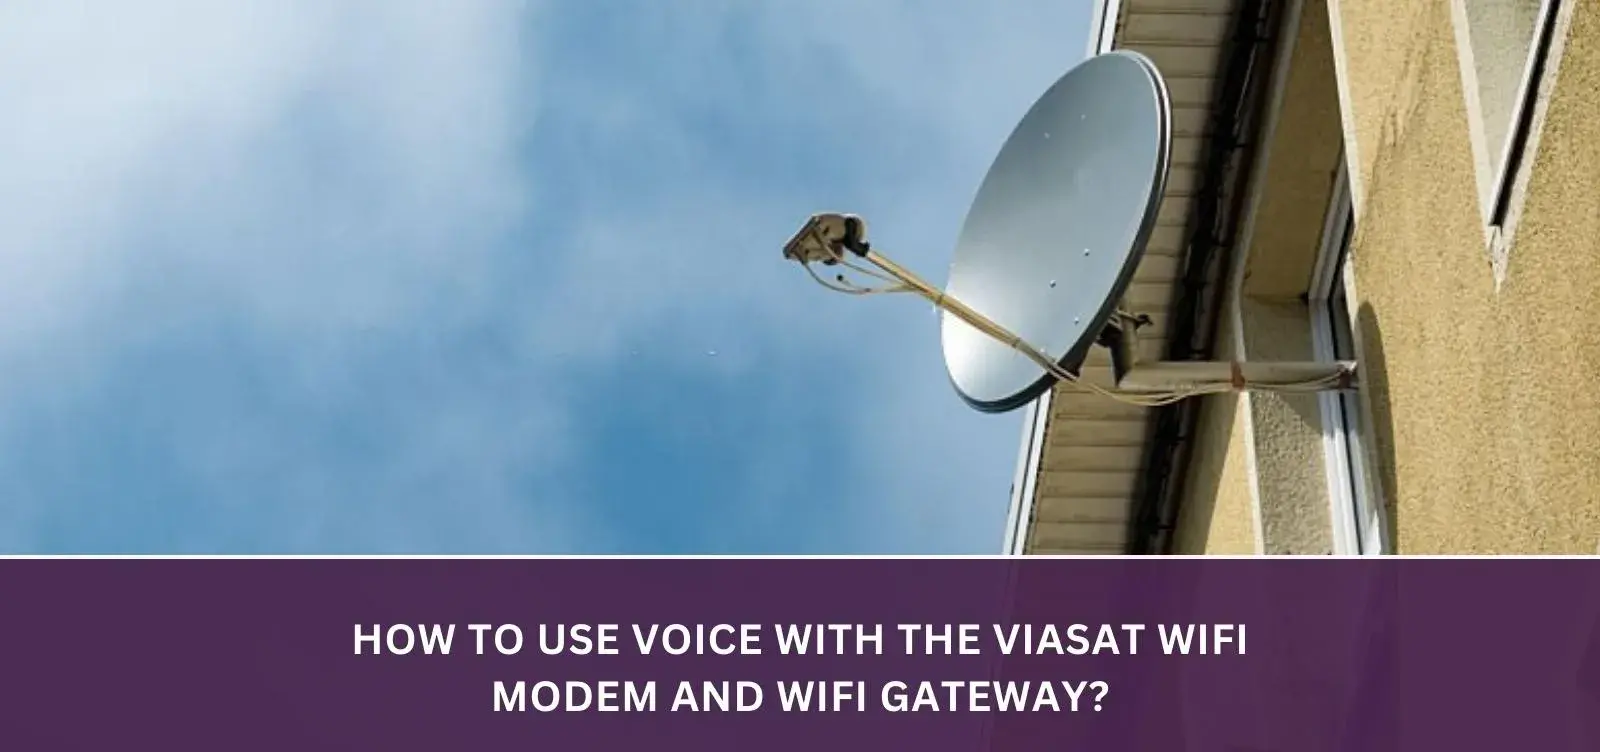 How to use Voice with the Viasat WiFi Modem and WiFi Gateway?